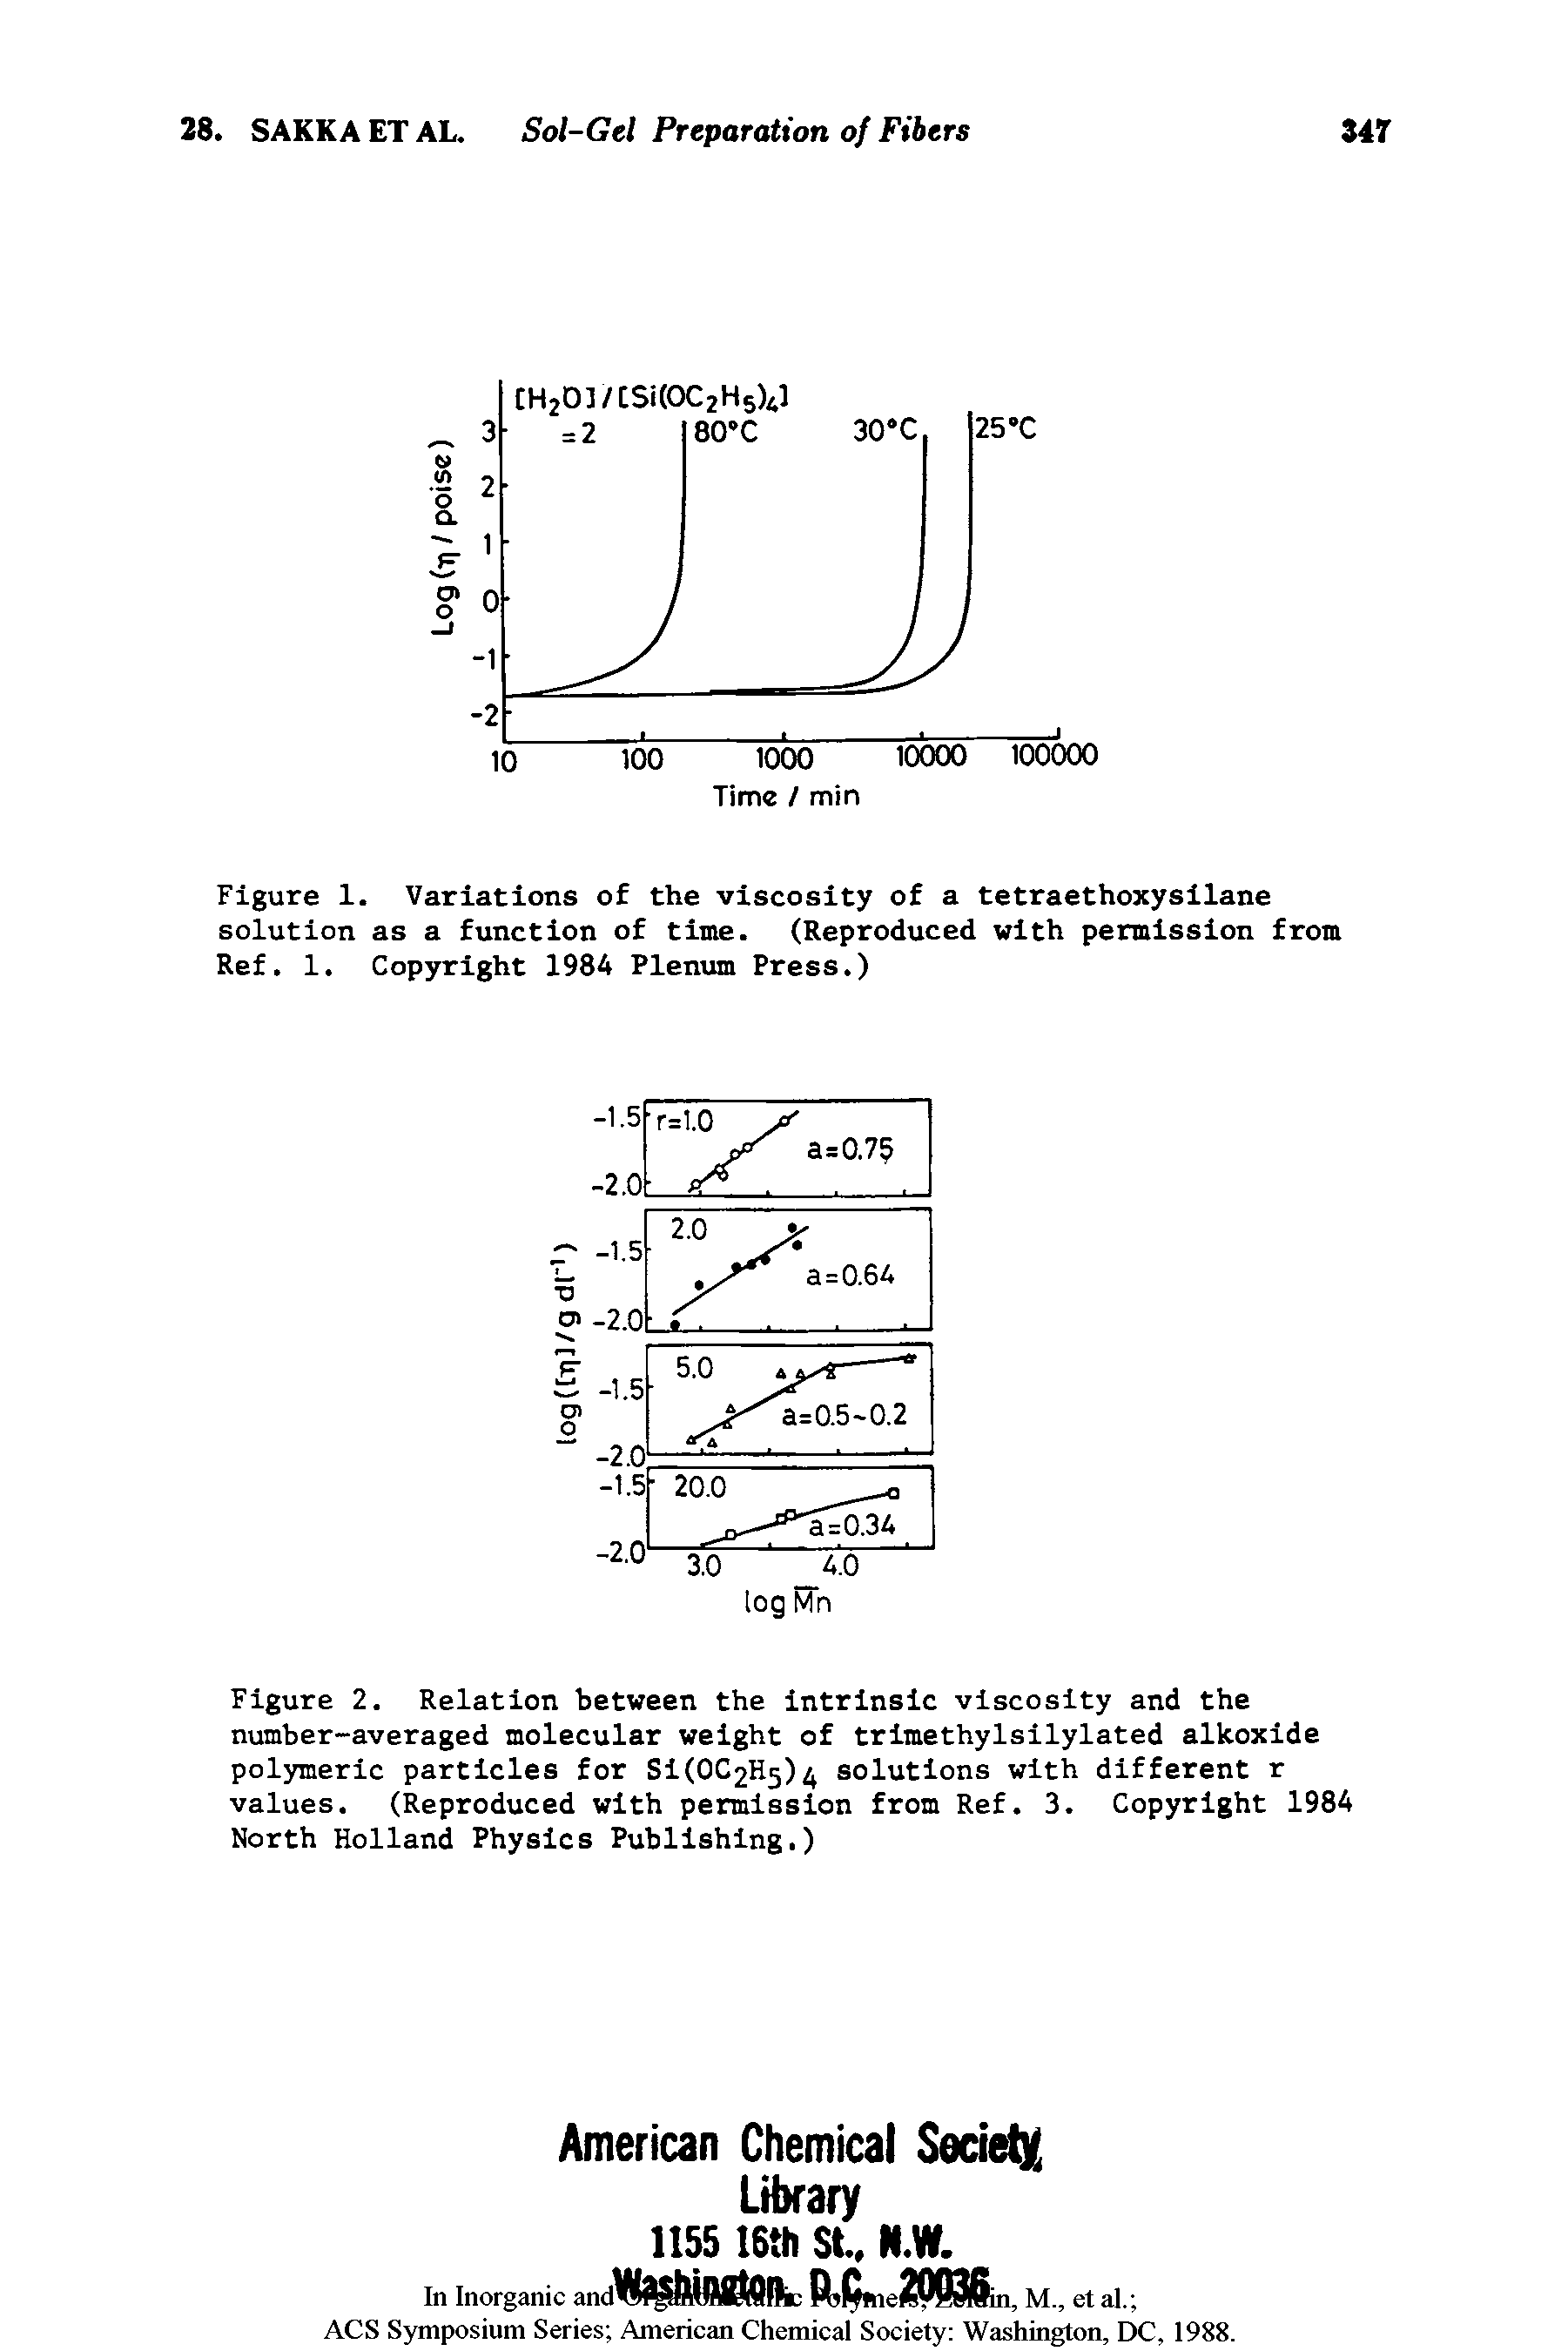 Figure 2. Relation between the intrinsic viscosity and the number-averaged molecular weight of trimethylsilylated alkoxide polymeric particles for Si(0C2H5) solutions with different r values. (Reproduced with permission from Ref. 3. Copyright 1984 North Holland Physics Publishing.)...